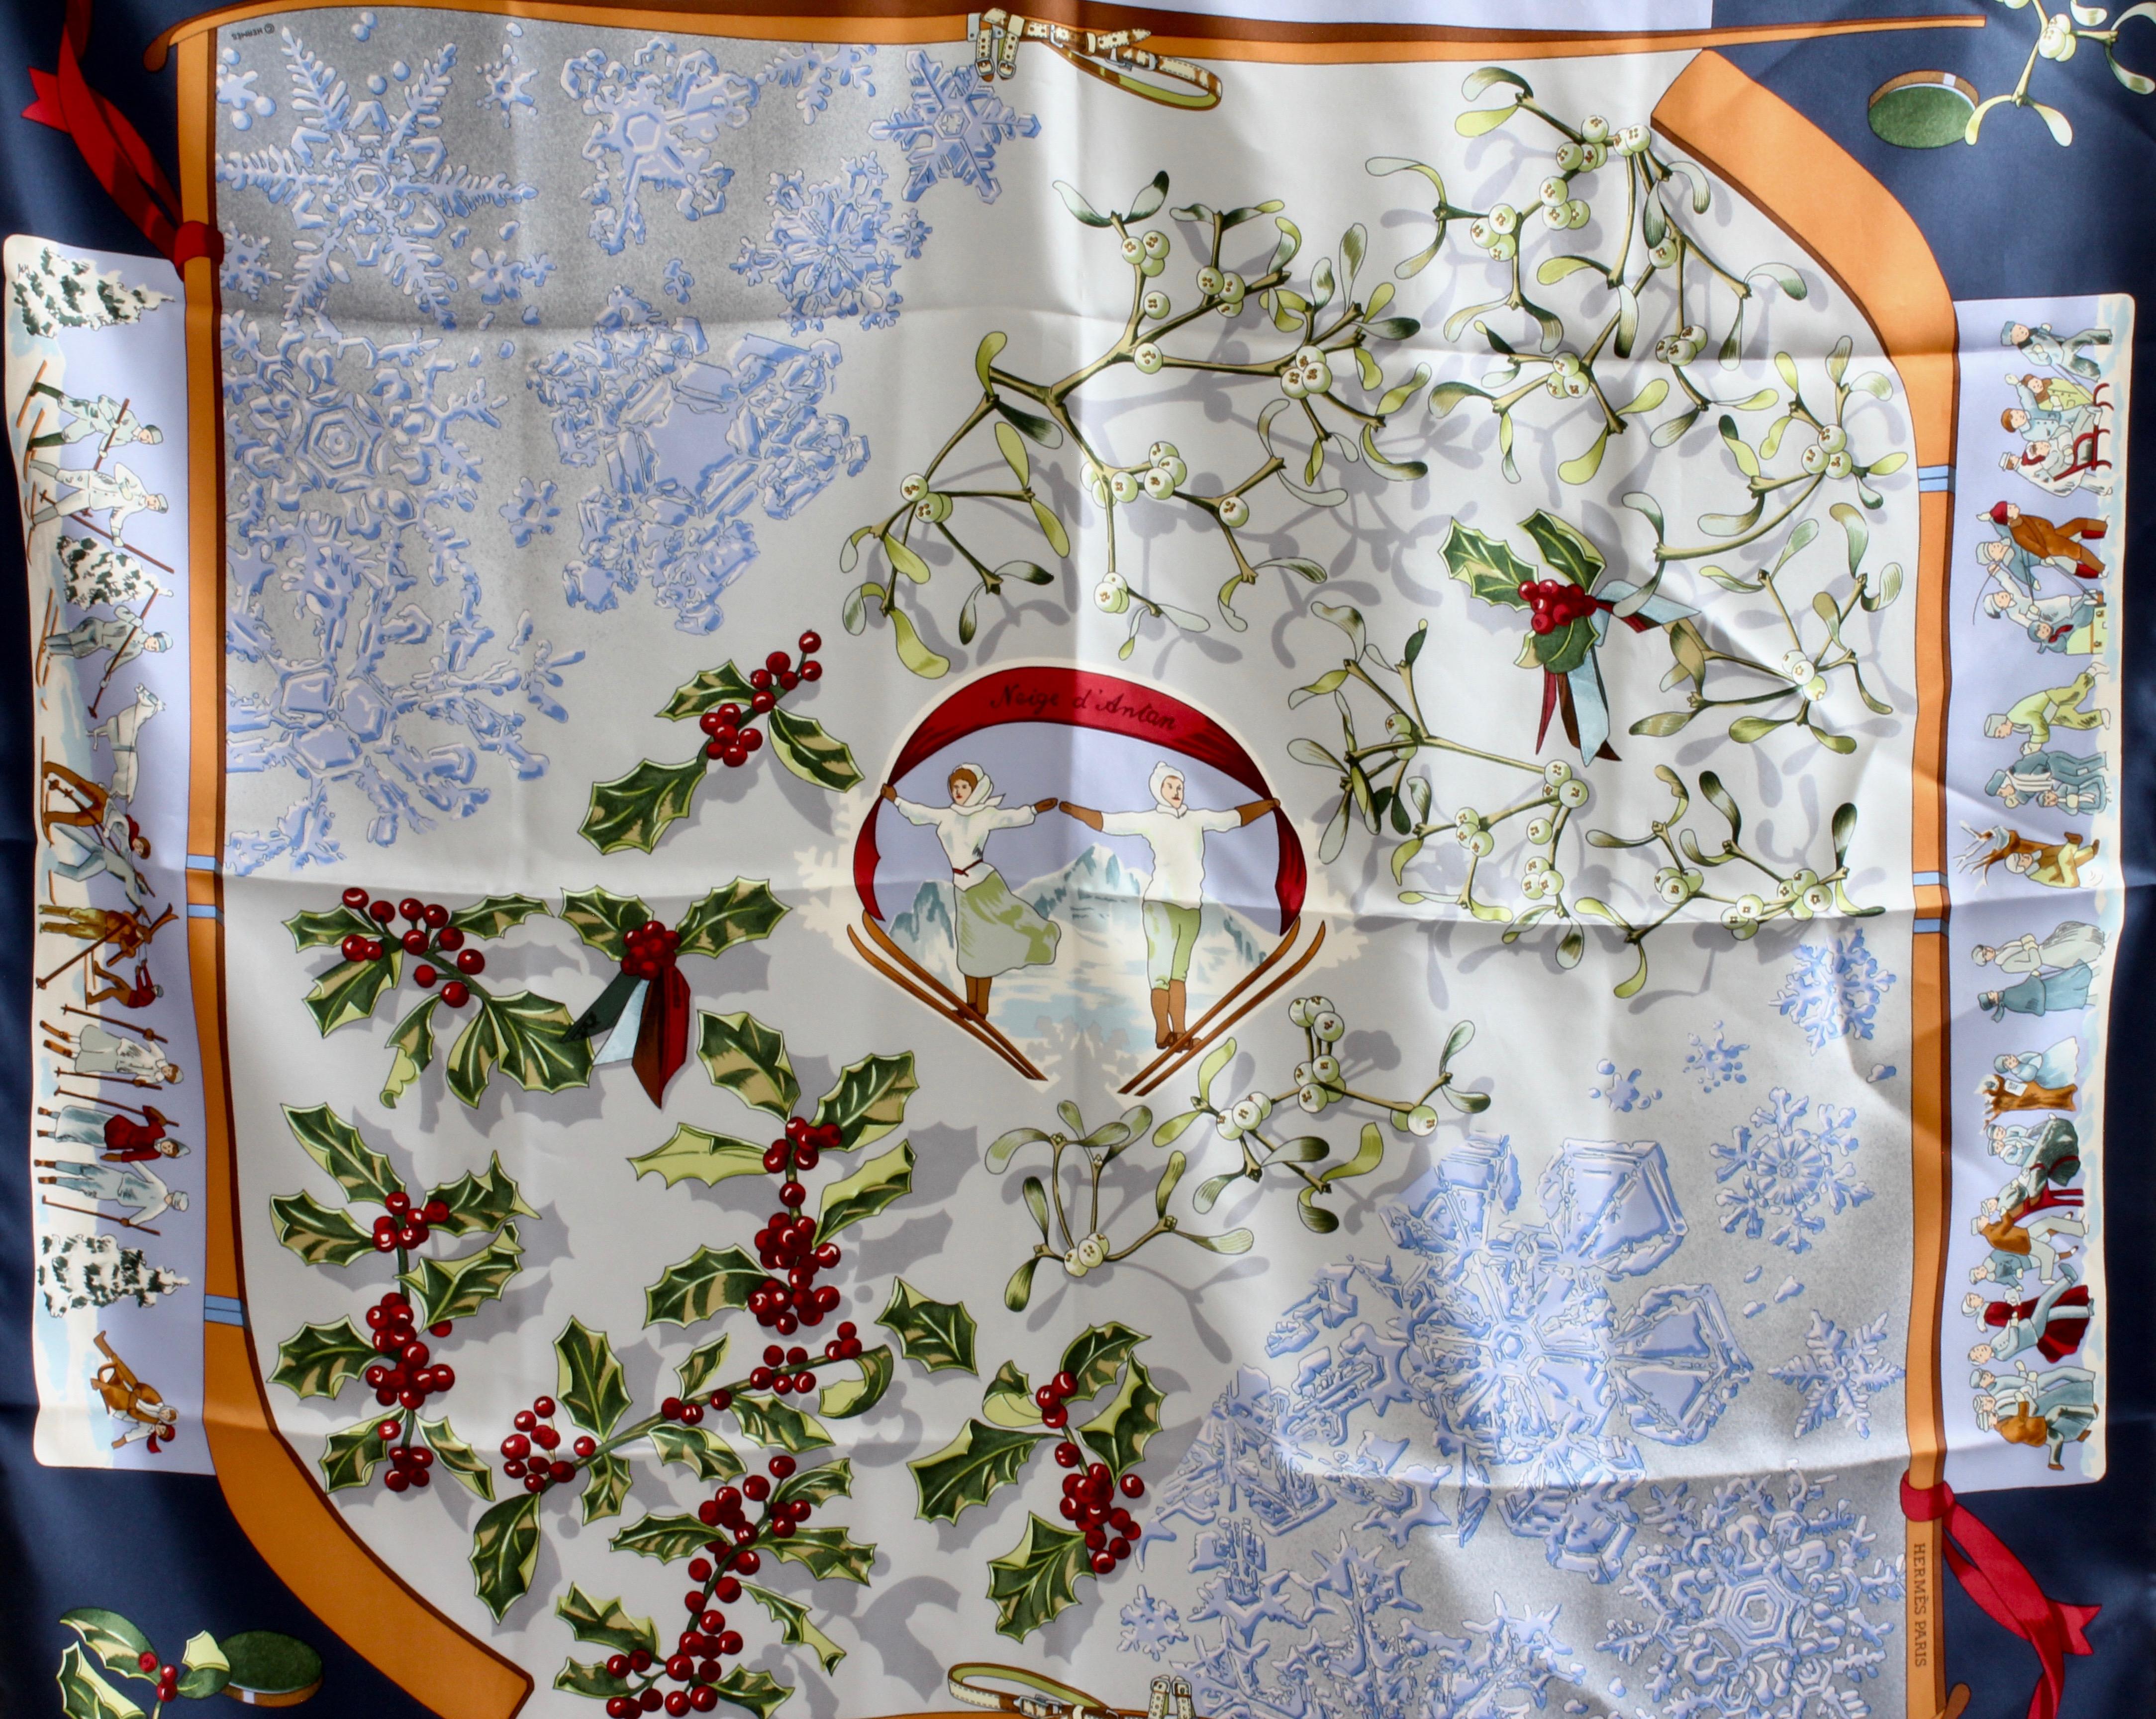 This gorgeous silk twill scarf or shawl was designed by artist Caty Latham for Hermes, and released in 1989.  Very hard to find in this condition and in this blue colorway.  In very good condition, it appears this piece was hardly, if ever, worn. 